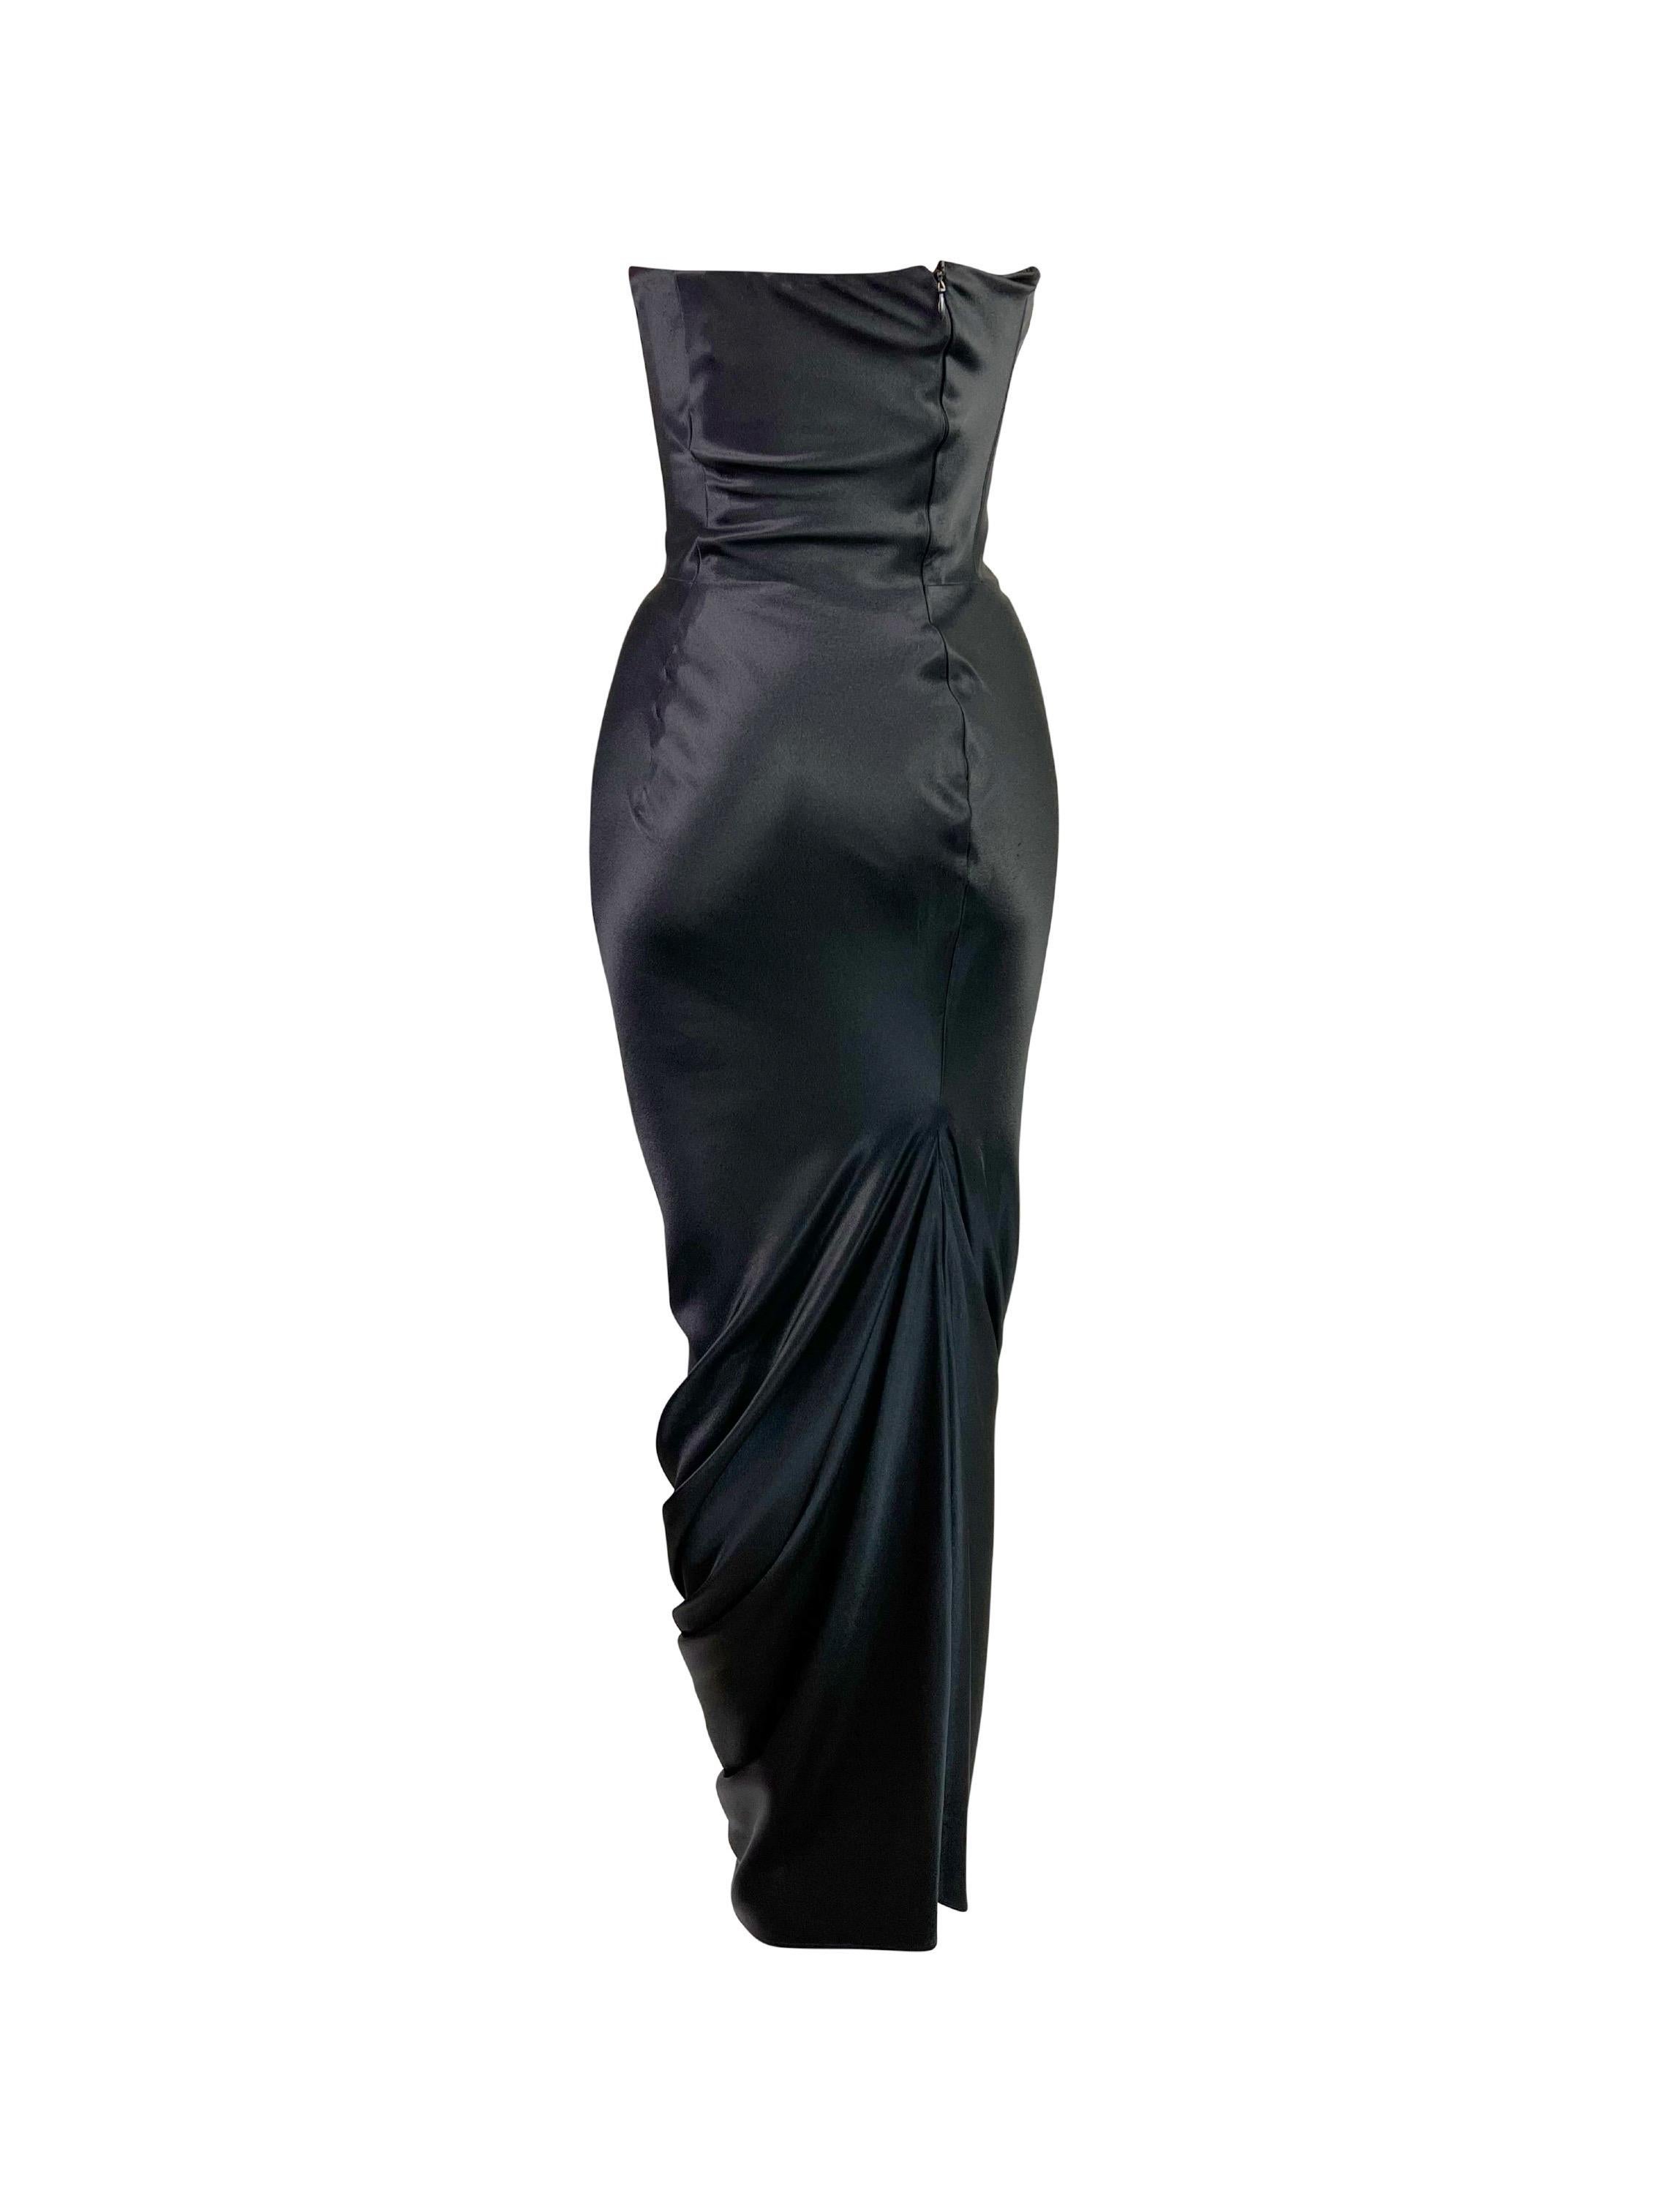 John Galliano Fall 1995 Corseted Gown For Sale 2